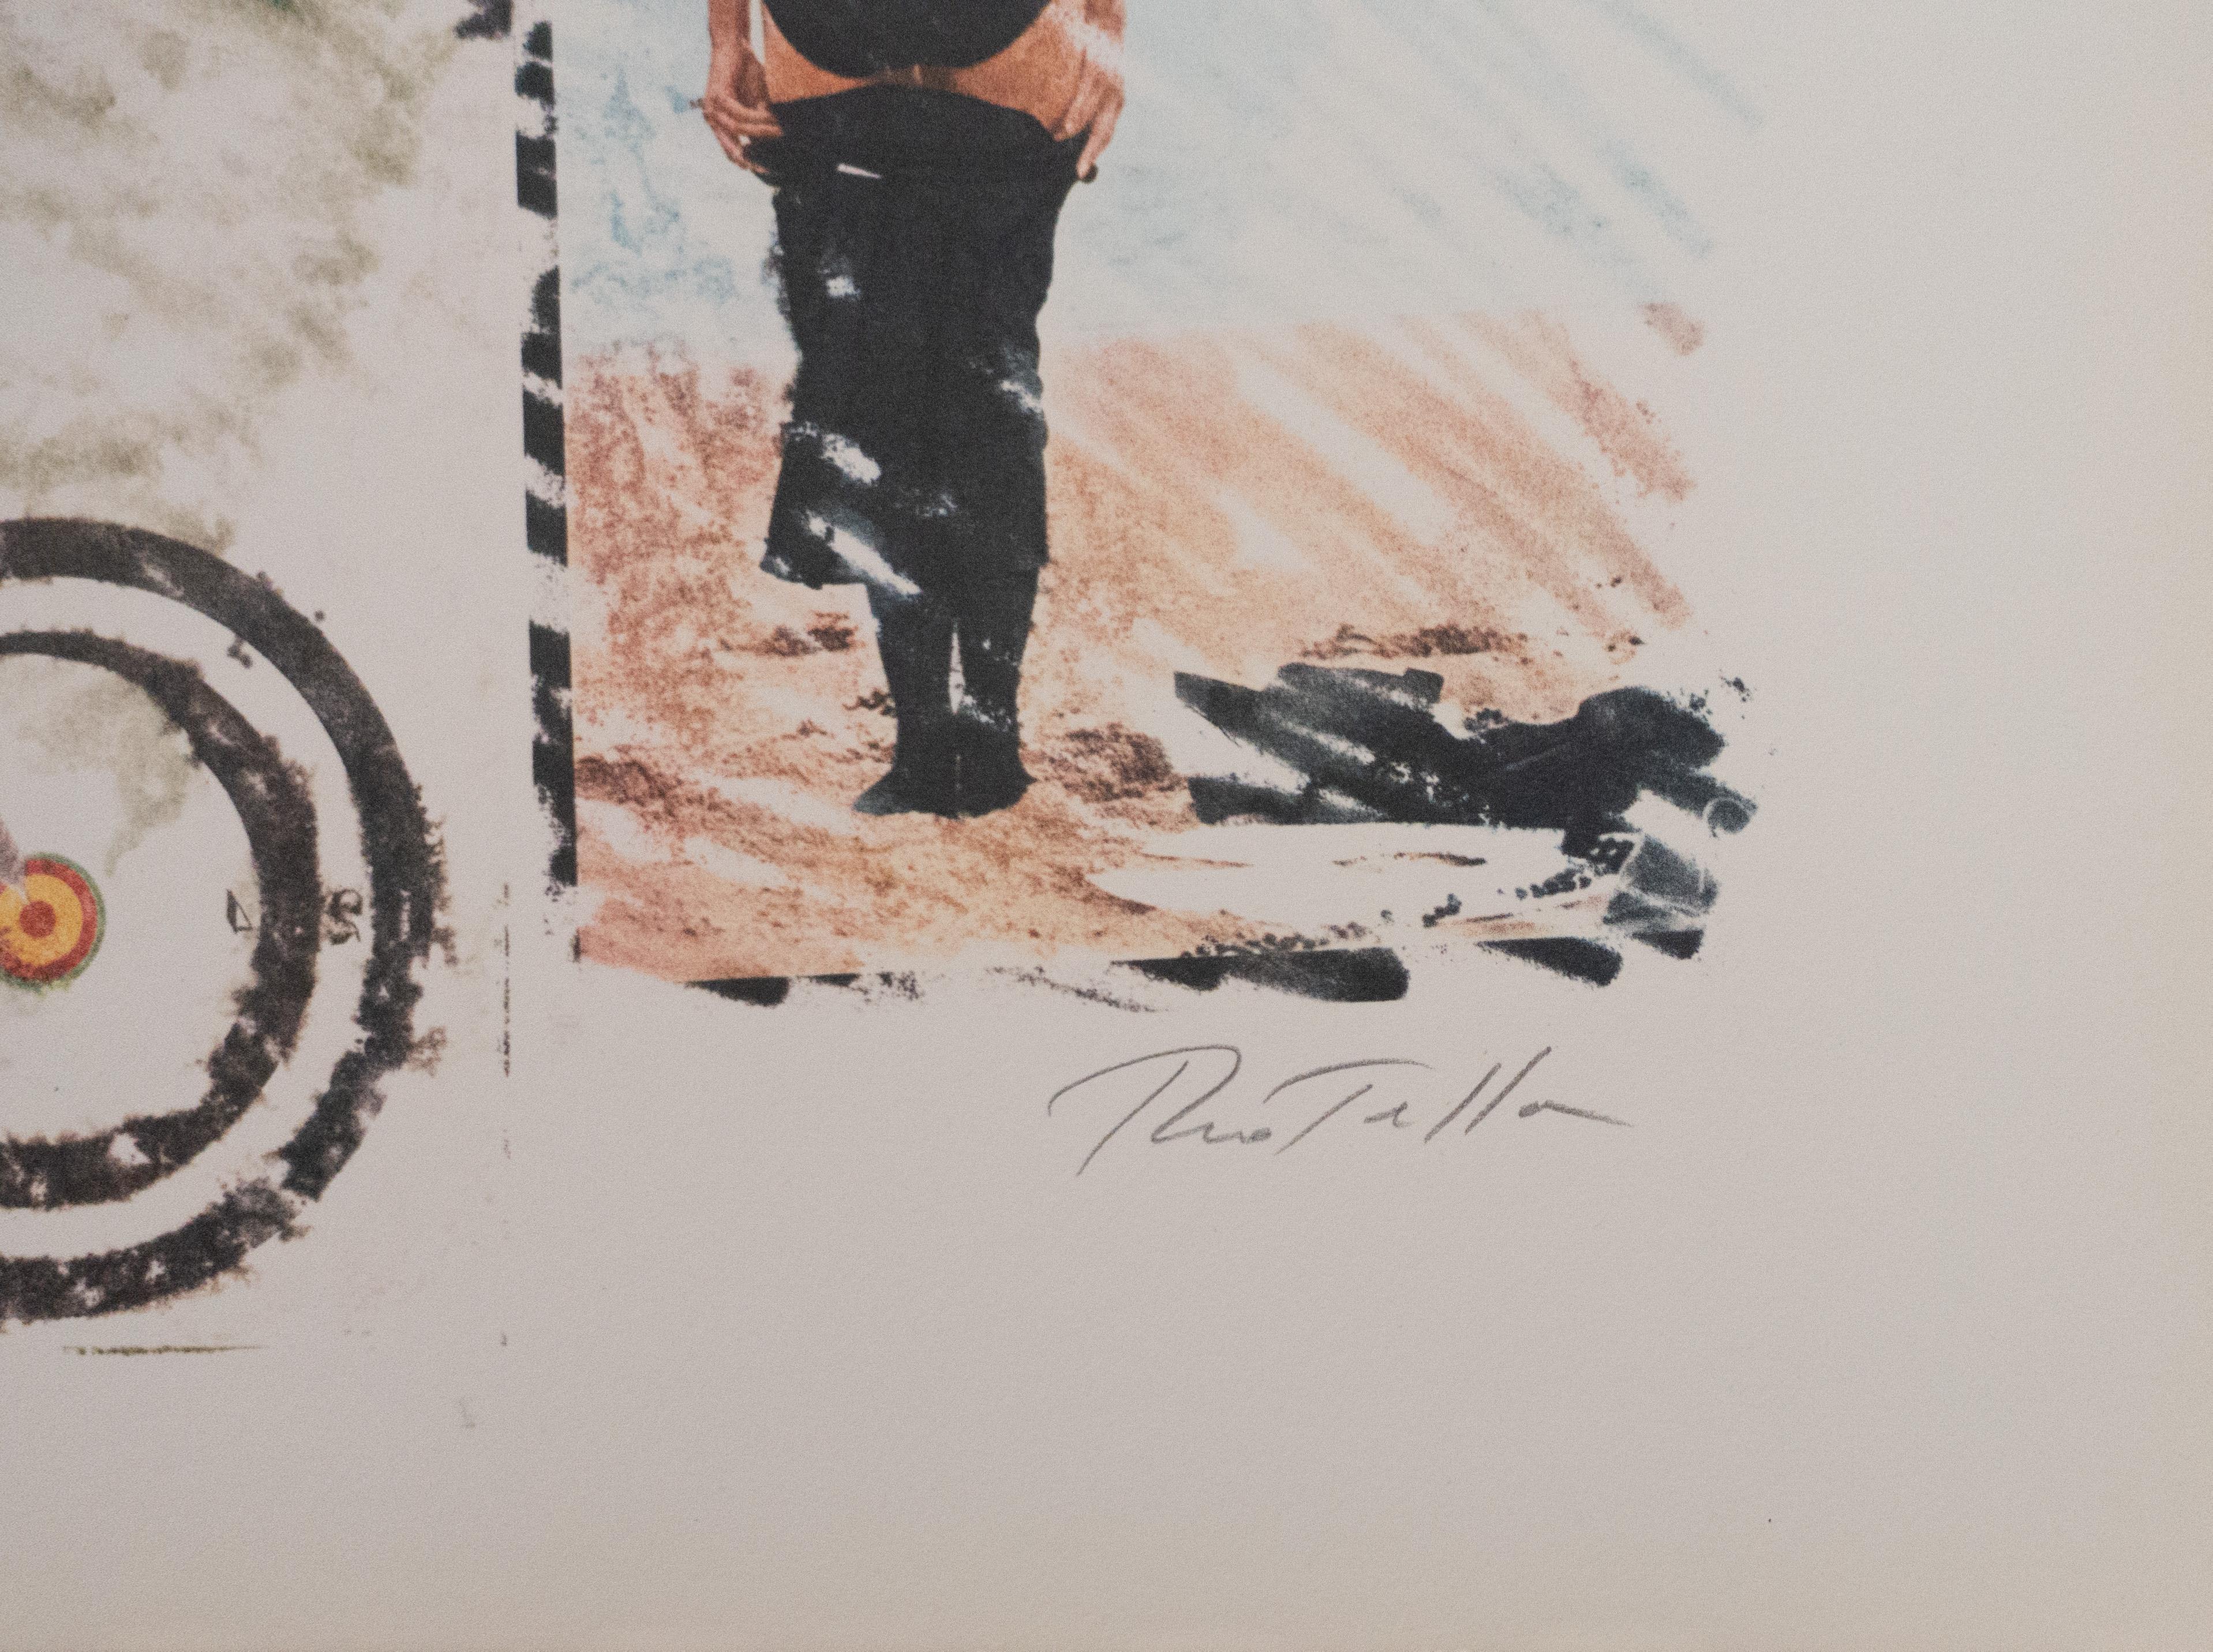 From a series of pop lithographs by Mimmo Rotella, published by Plura Edizioni, Italy, dating back to the early 1970s. Signed and numbered in pencil on the front. Edition 60/80 copies.
Opera Proveniente da collezione privata, Italia.

The piece is